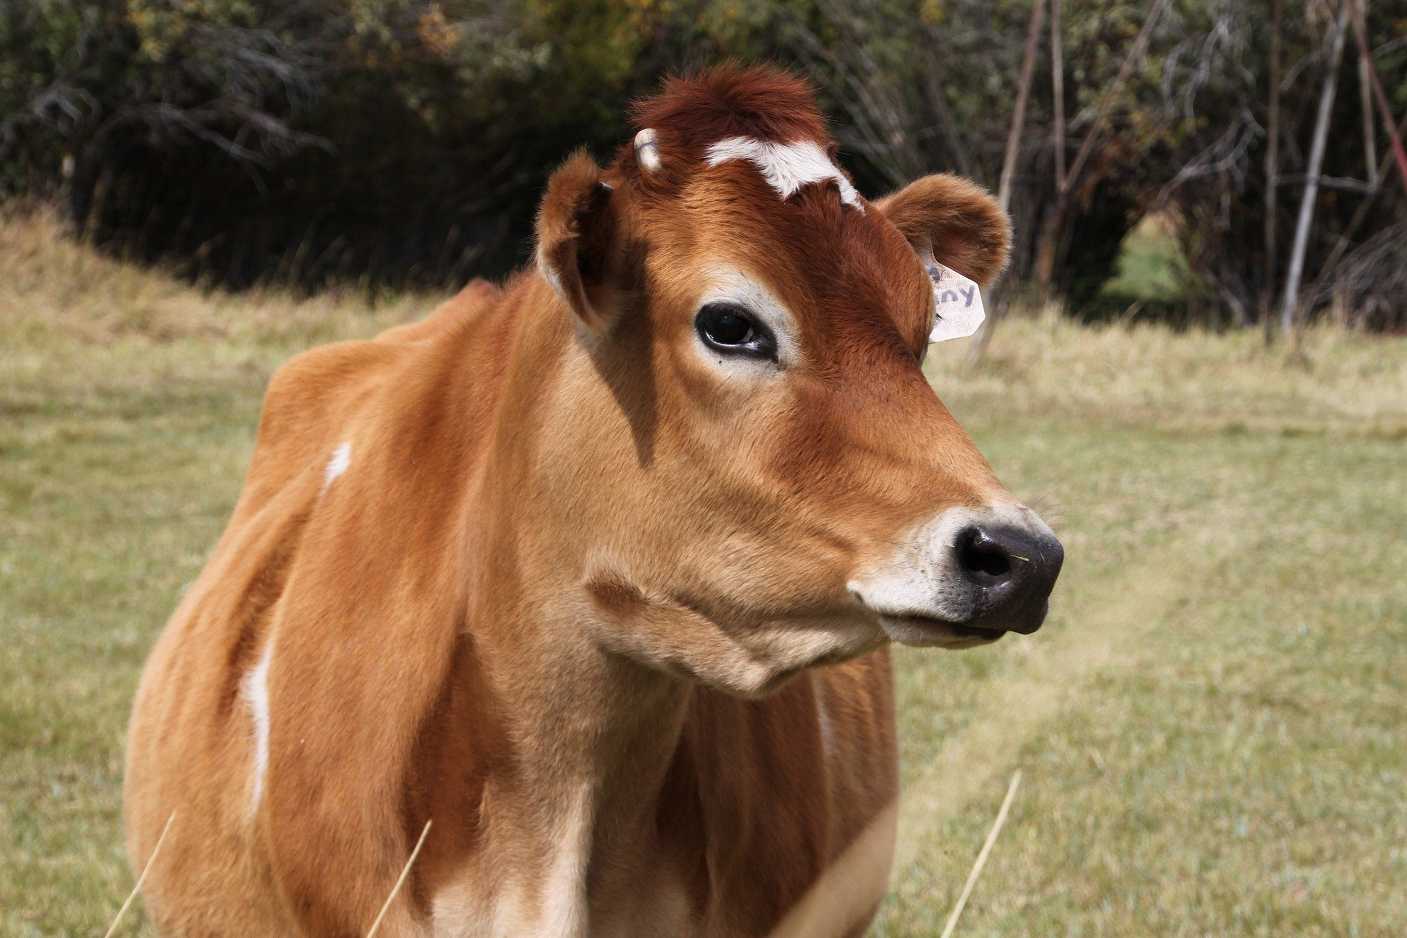 Are Cows Good Pets